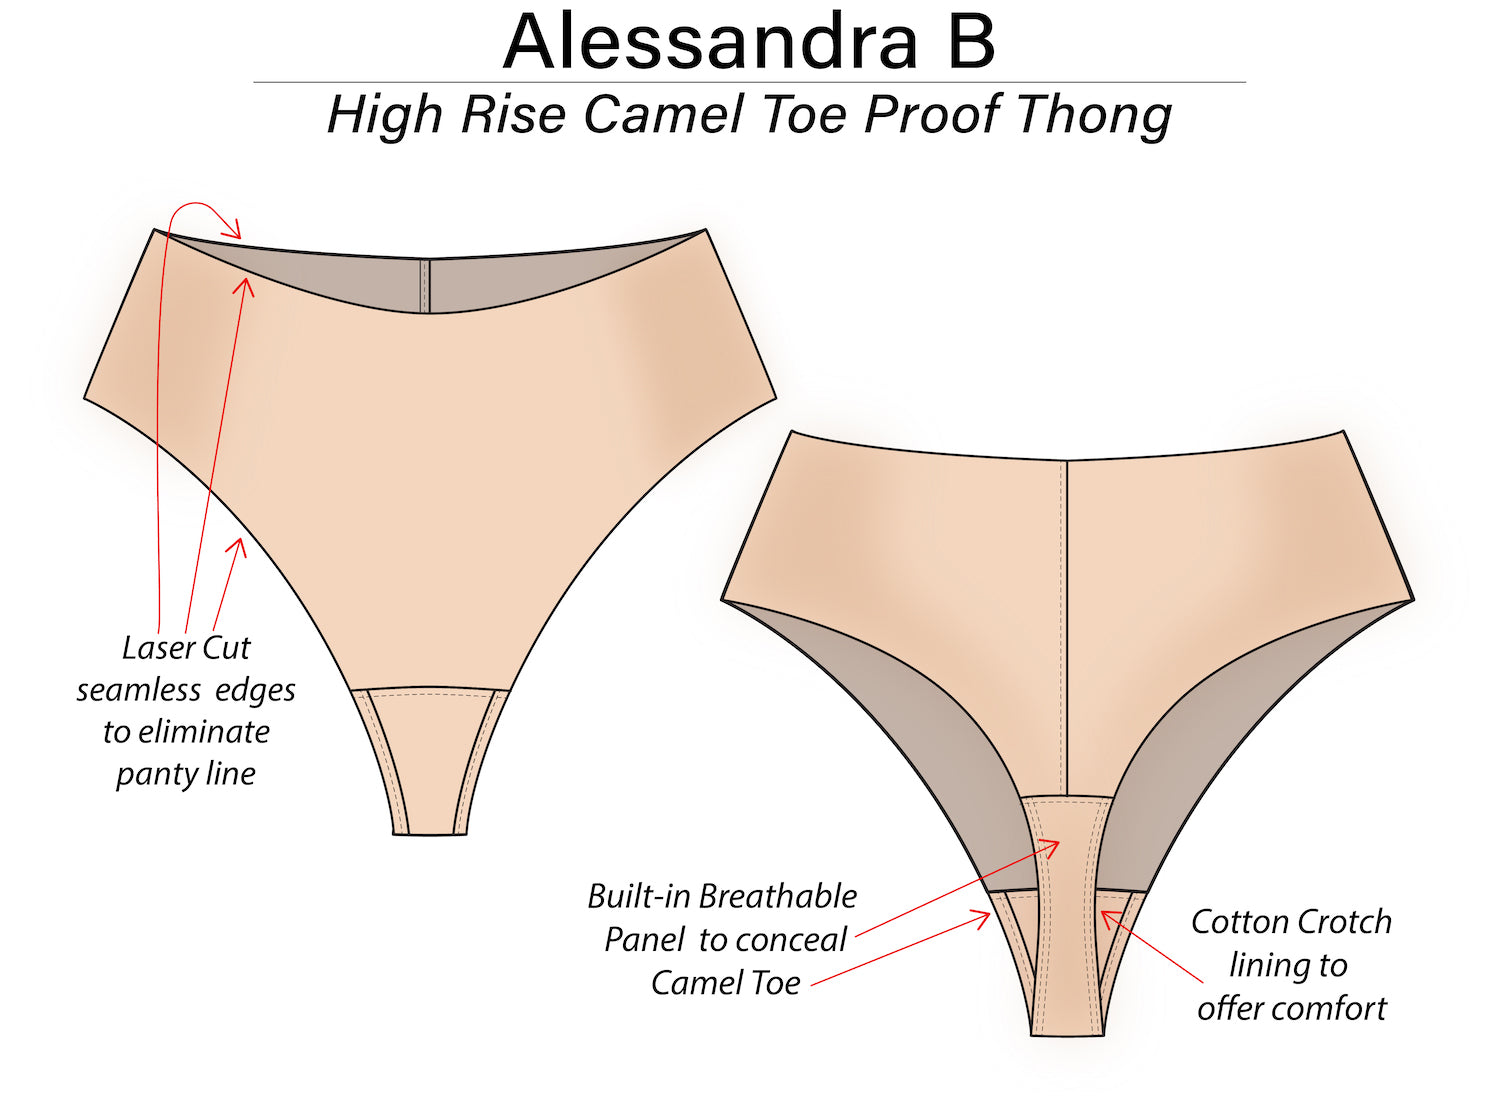 Britain braced for arrival of the £25 camel toe knickers that aim